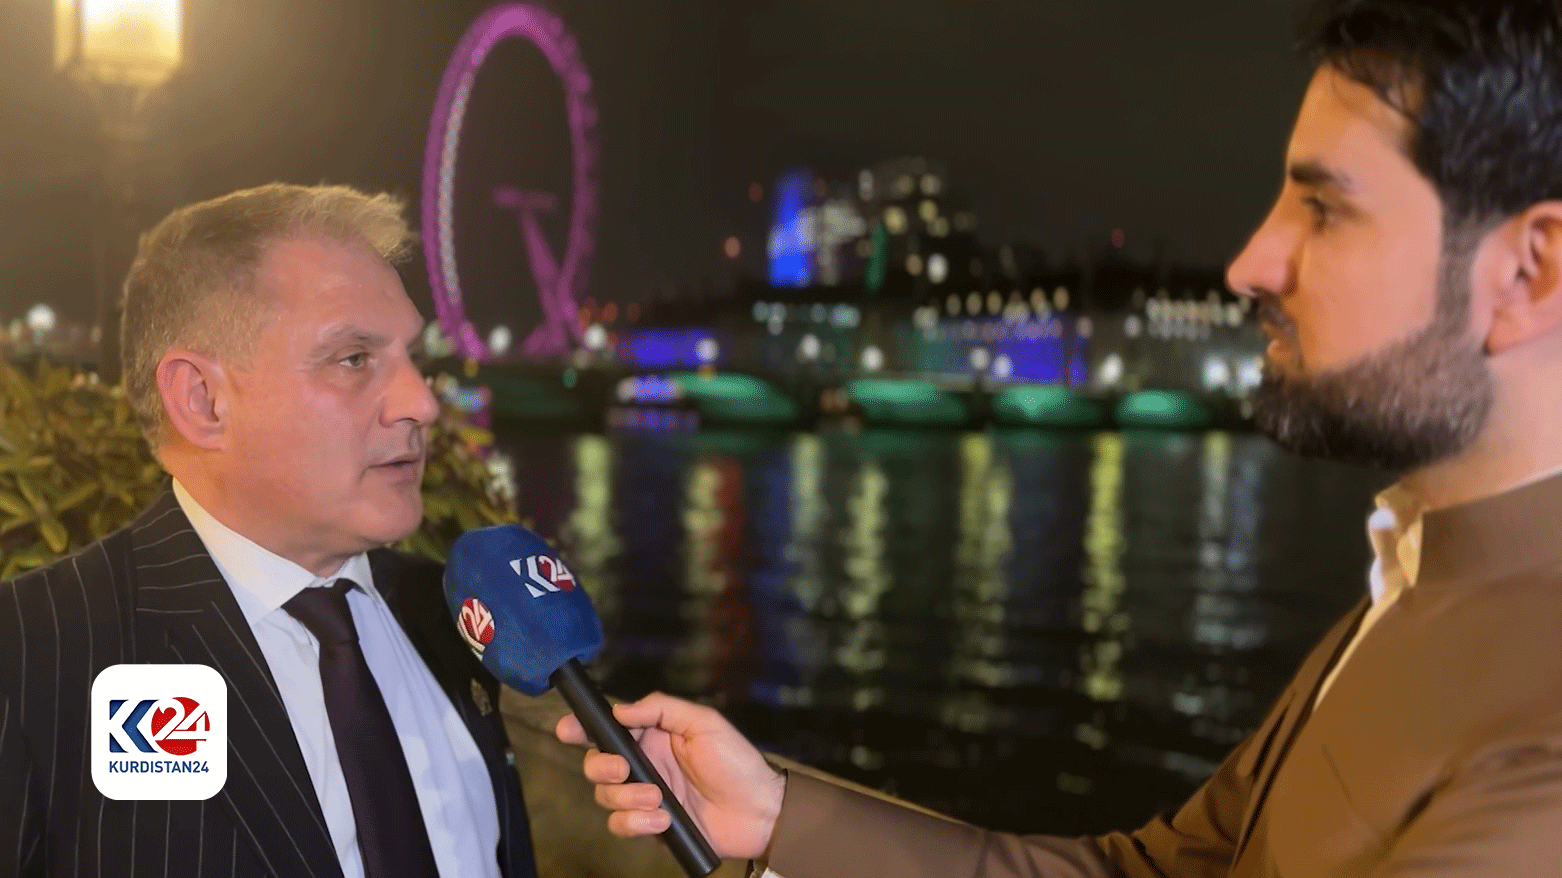 UKKurdistan Region relations are going from strength to strength says UK MP